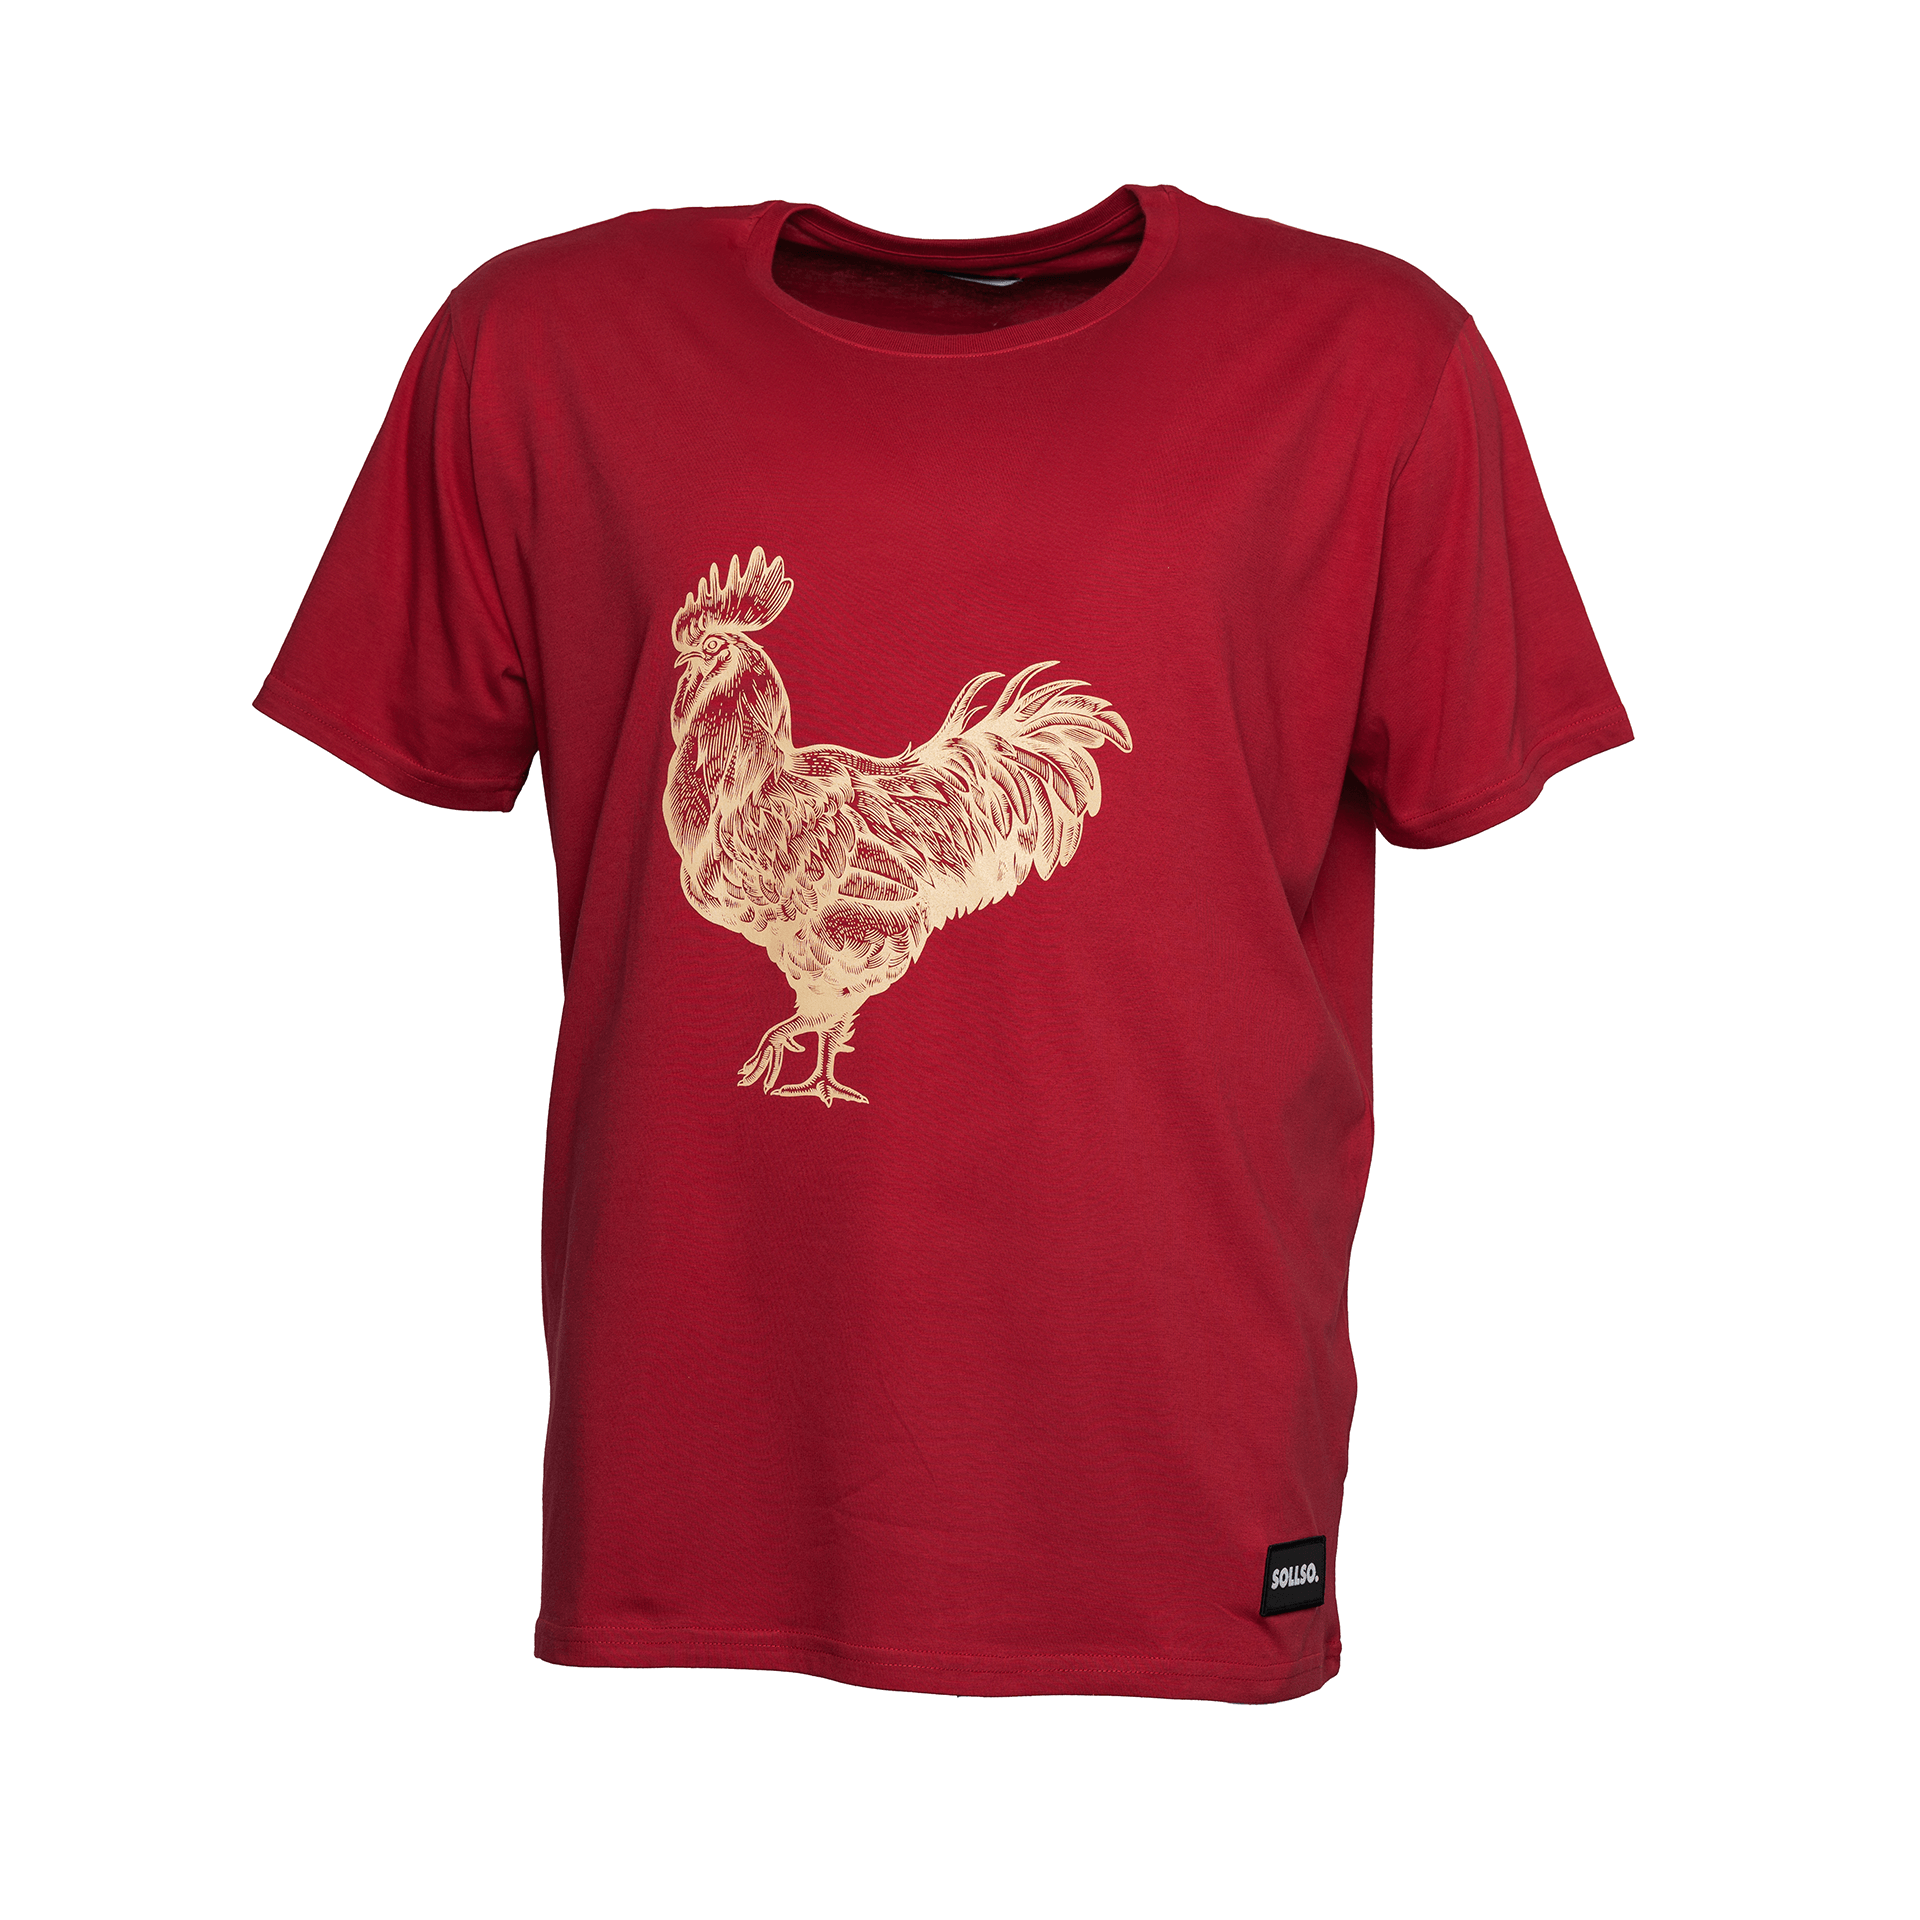 SOLLSO. T-Shirt "Rooster", Farbe Ginger Red, Größe 4XL